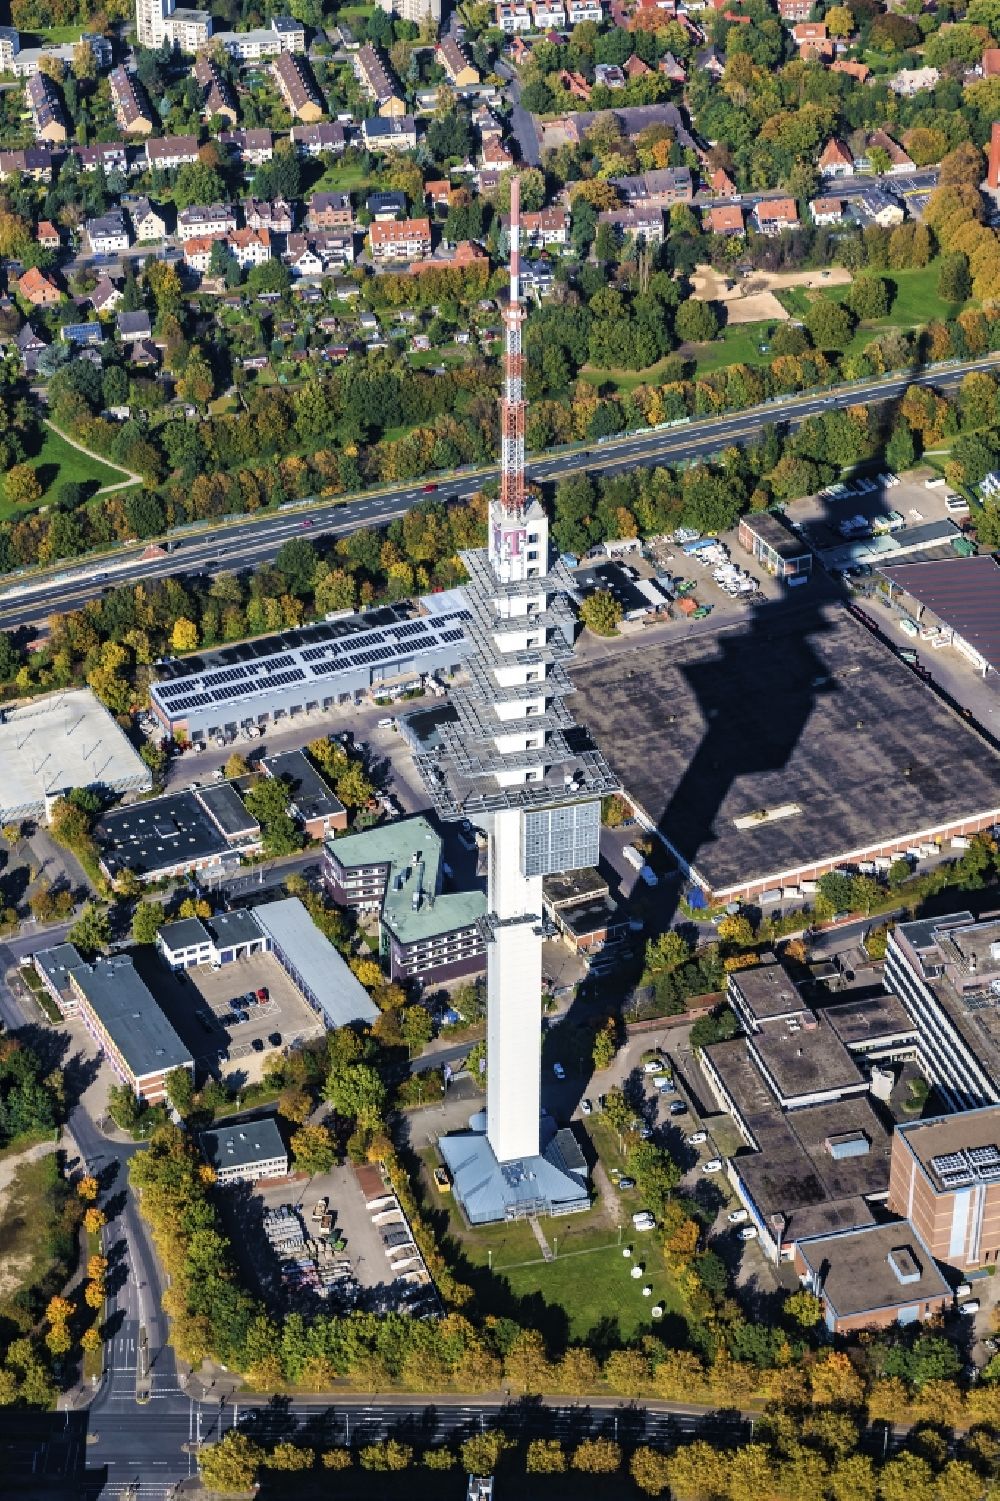 Hannover from above - DFMG Deutsche Funkturm GmbH on Neue-Land-Strasse in the district Buchholz-Kleefeld in Hannover in the state Lower Saxony, Germany